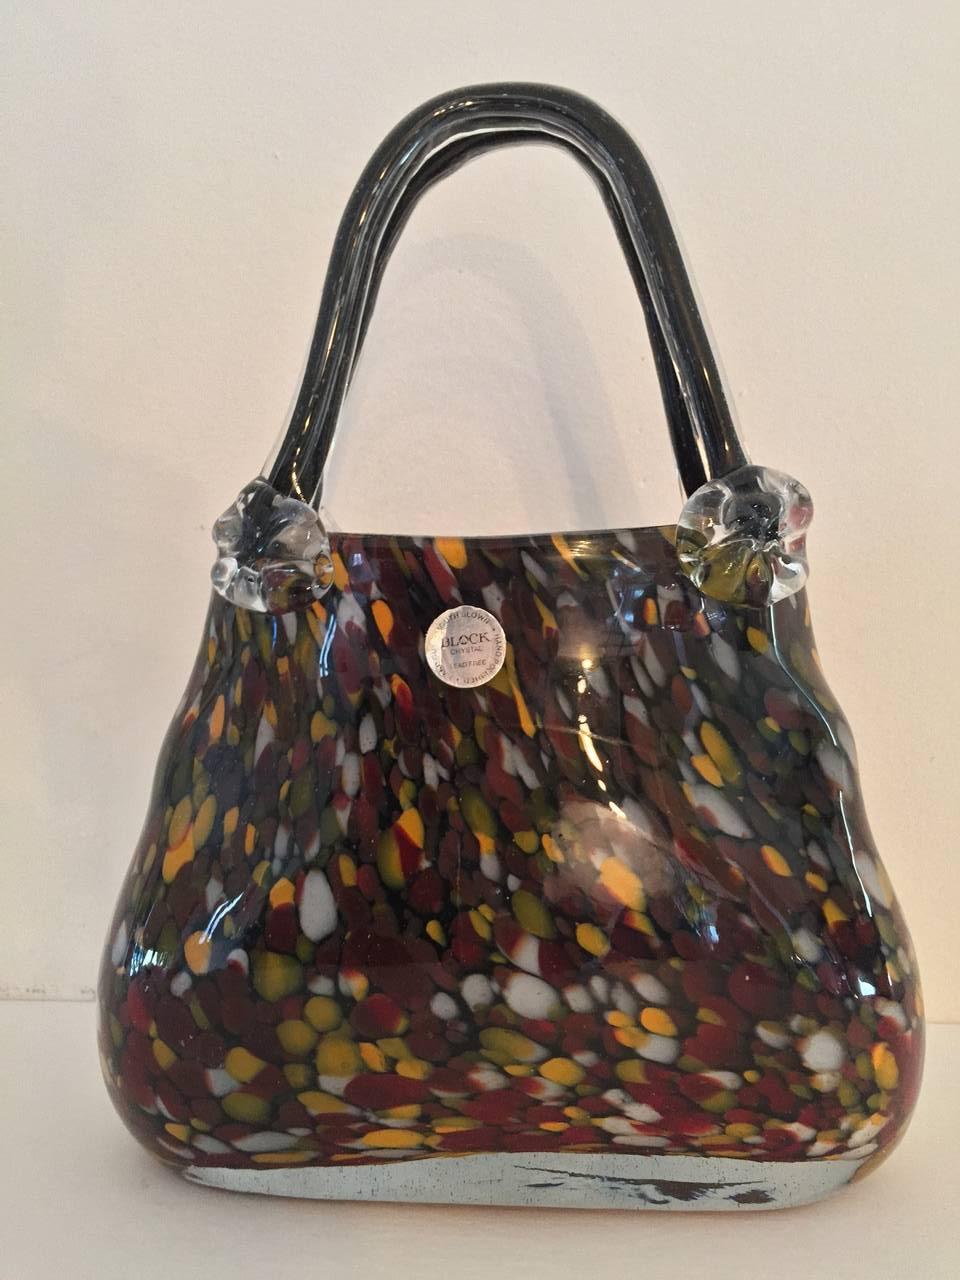 A women's handbag made of lead crystal by Block.  Portugal, circa 1980.  Feature beautiful inclusions. Signed with maker's label.